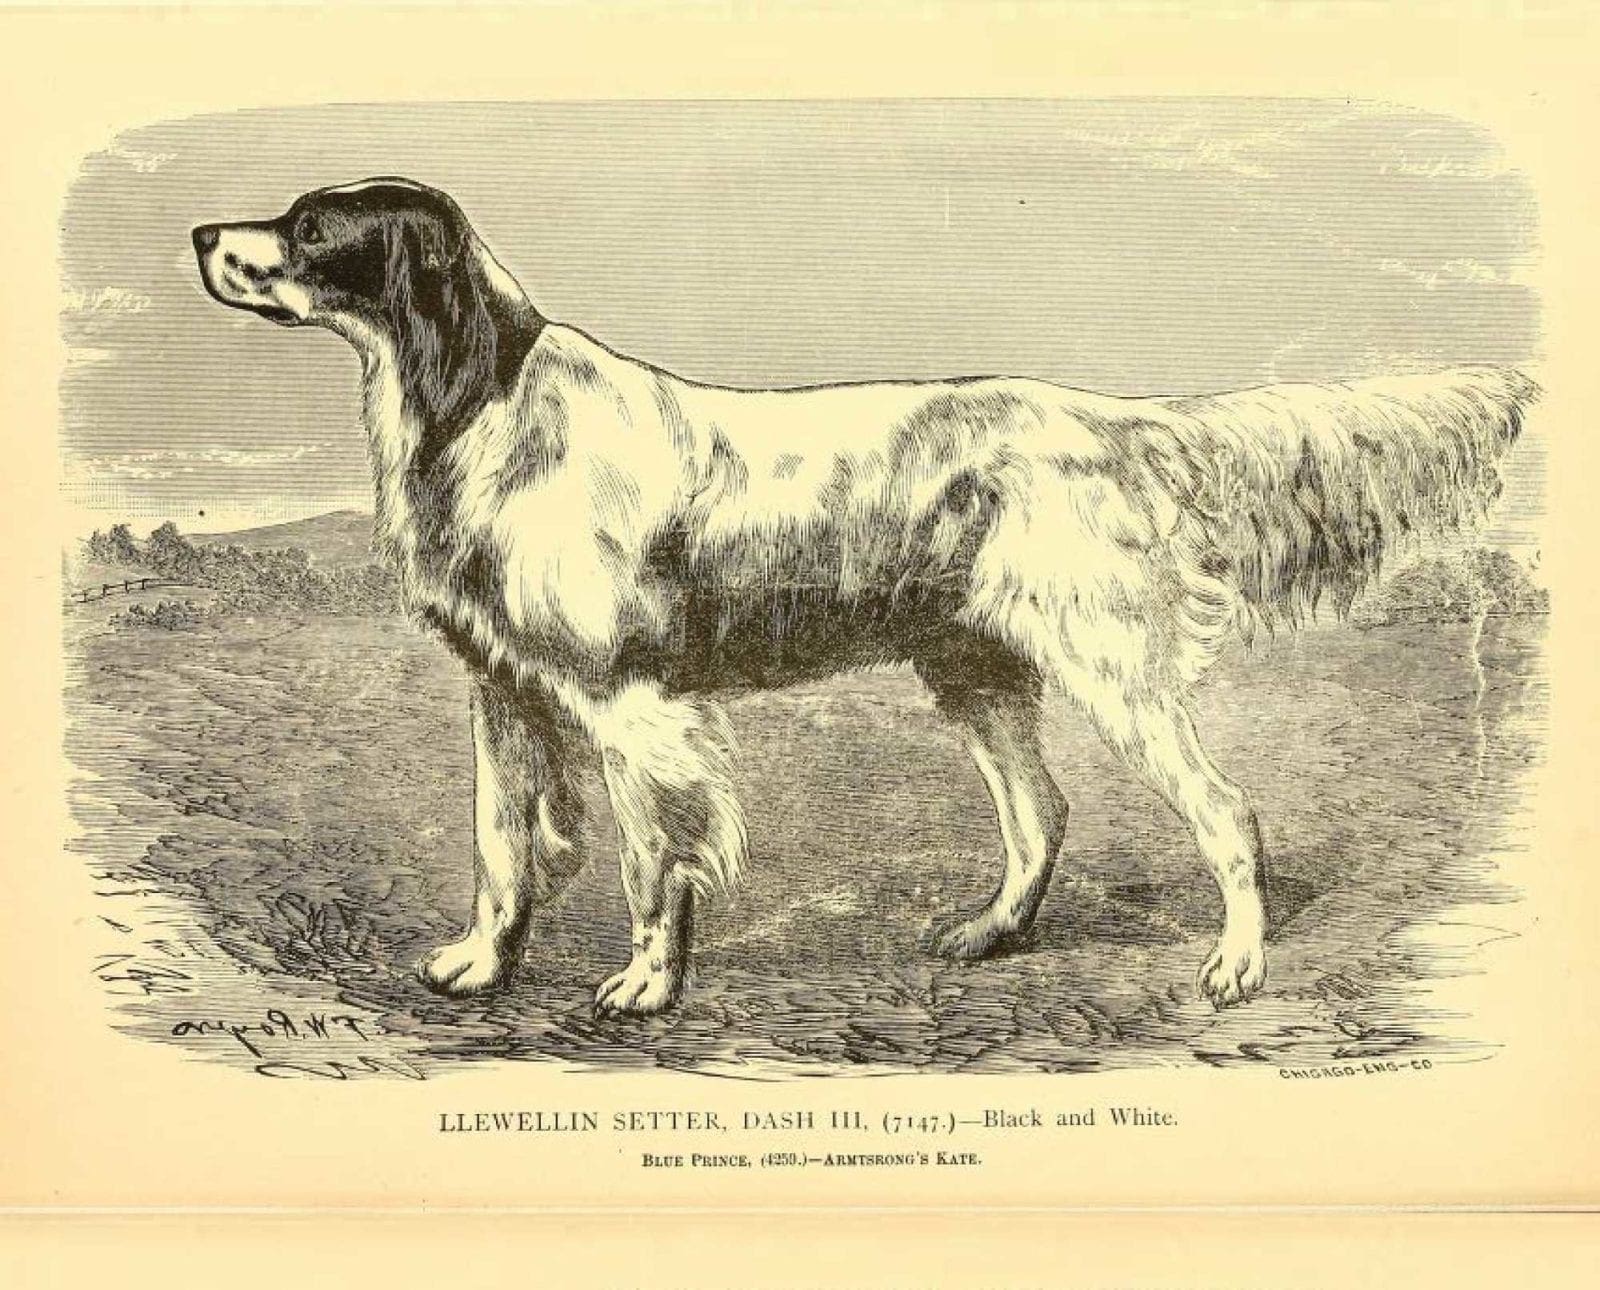 A Llewellin setter on point.